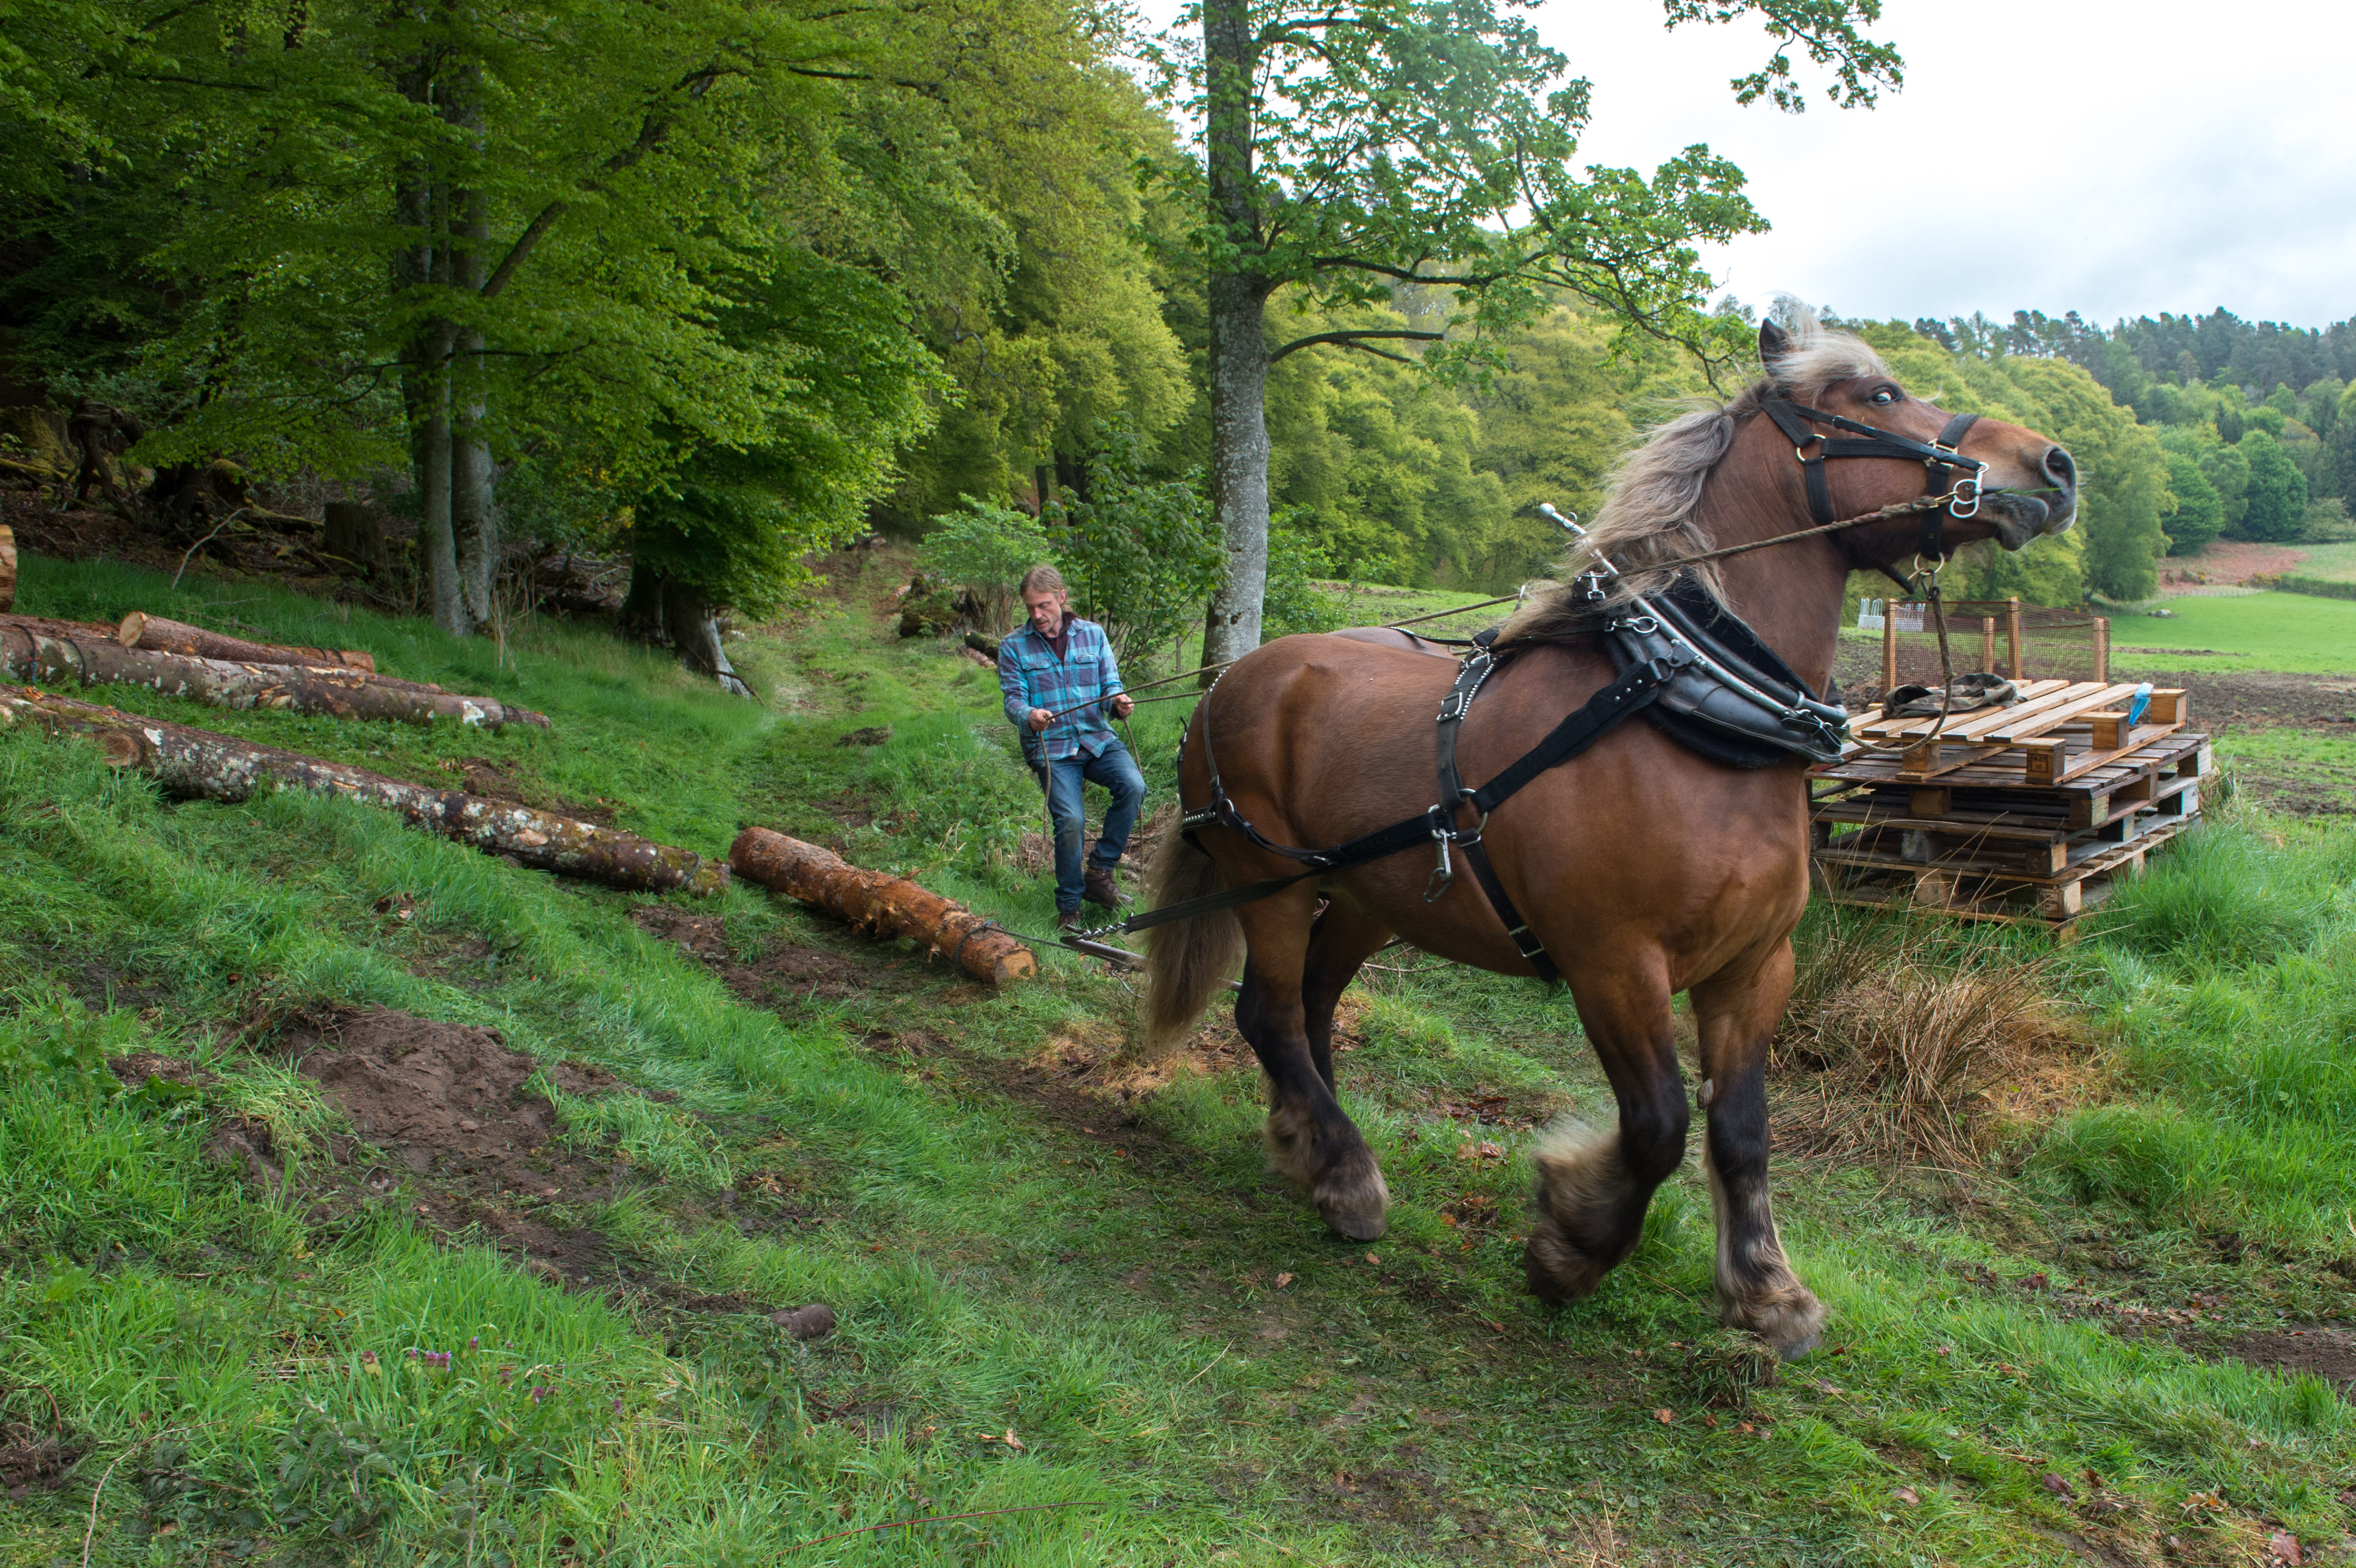 Simon Dakin and his horse 'Tarzan' are pictured extracting timber for the saw mill.

Pictures by Jason Hedges